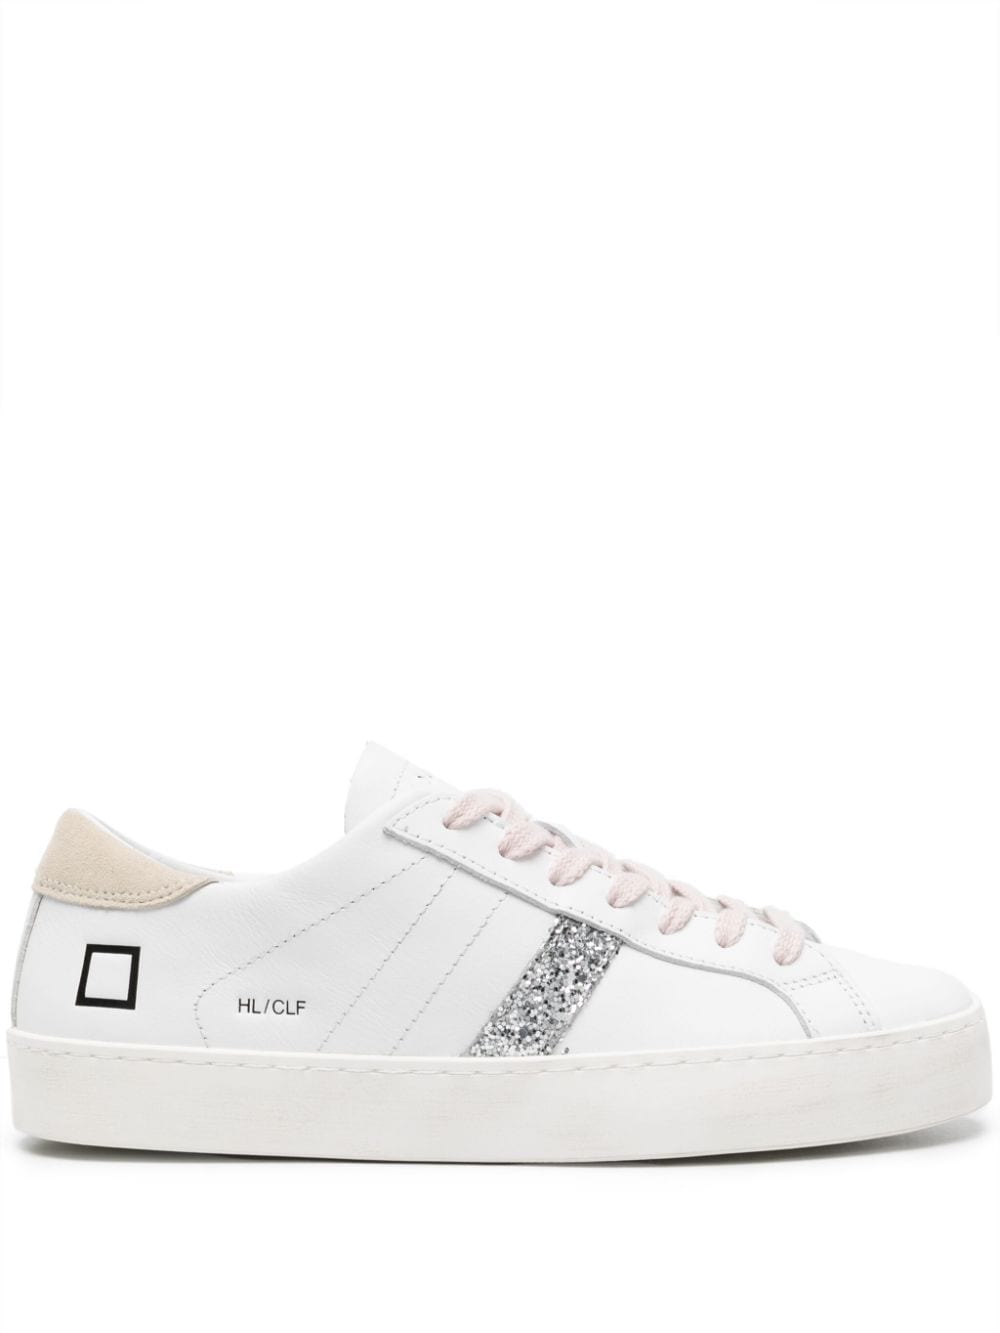 Date Hill Leather Trainers In White